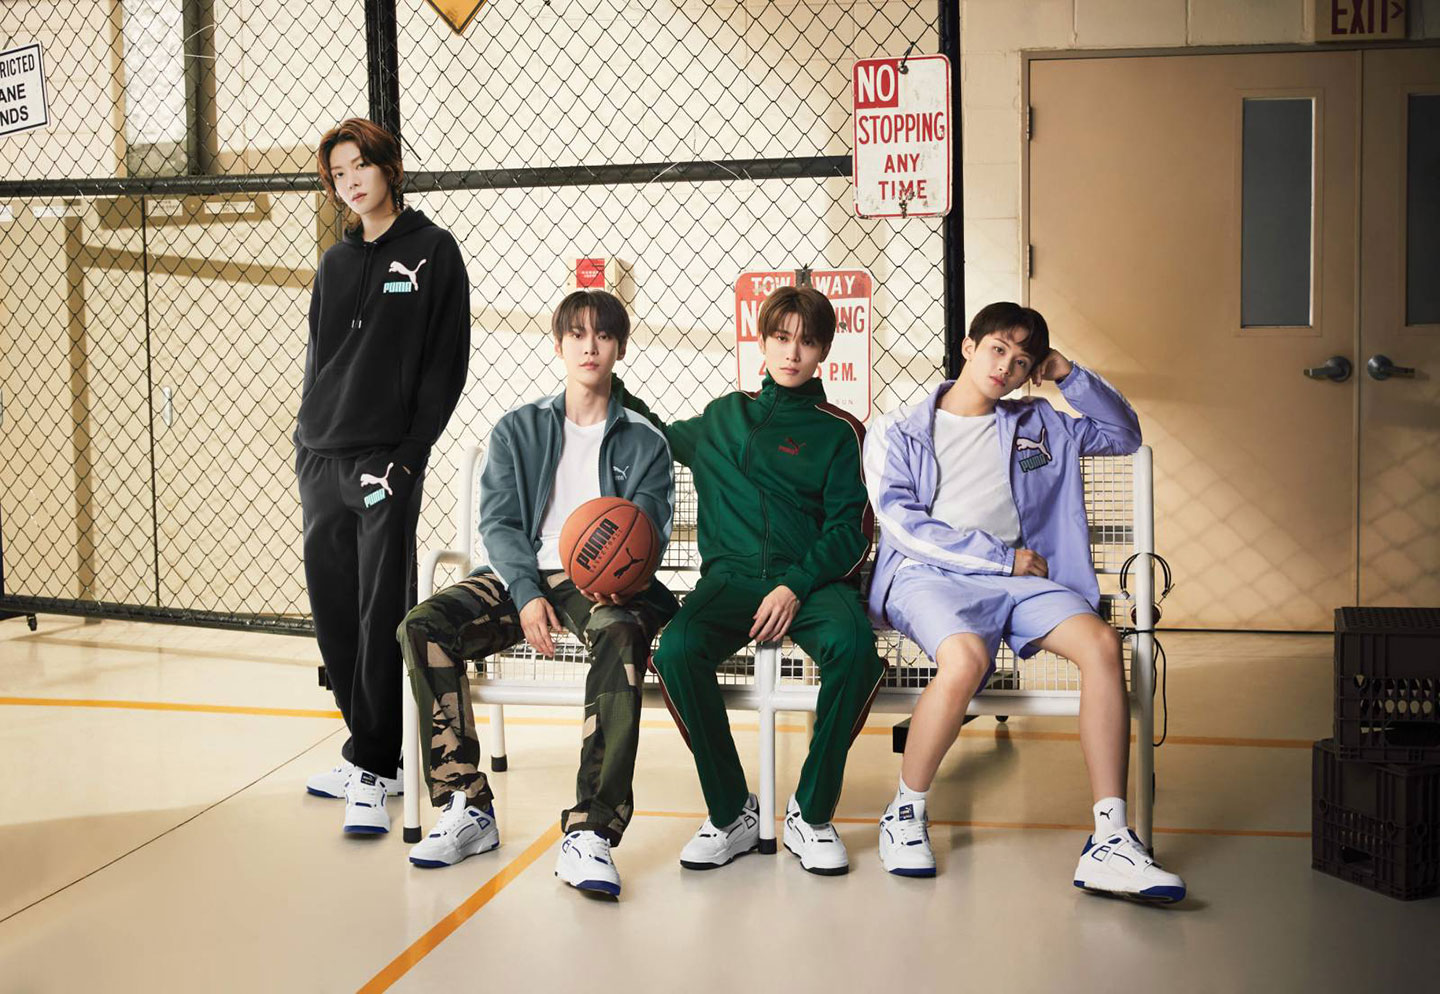 Puma NCT 127 Slipstream Campaign Behind The Scenes